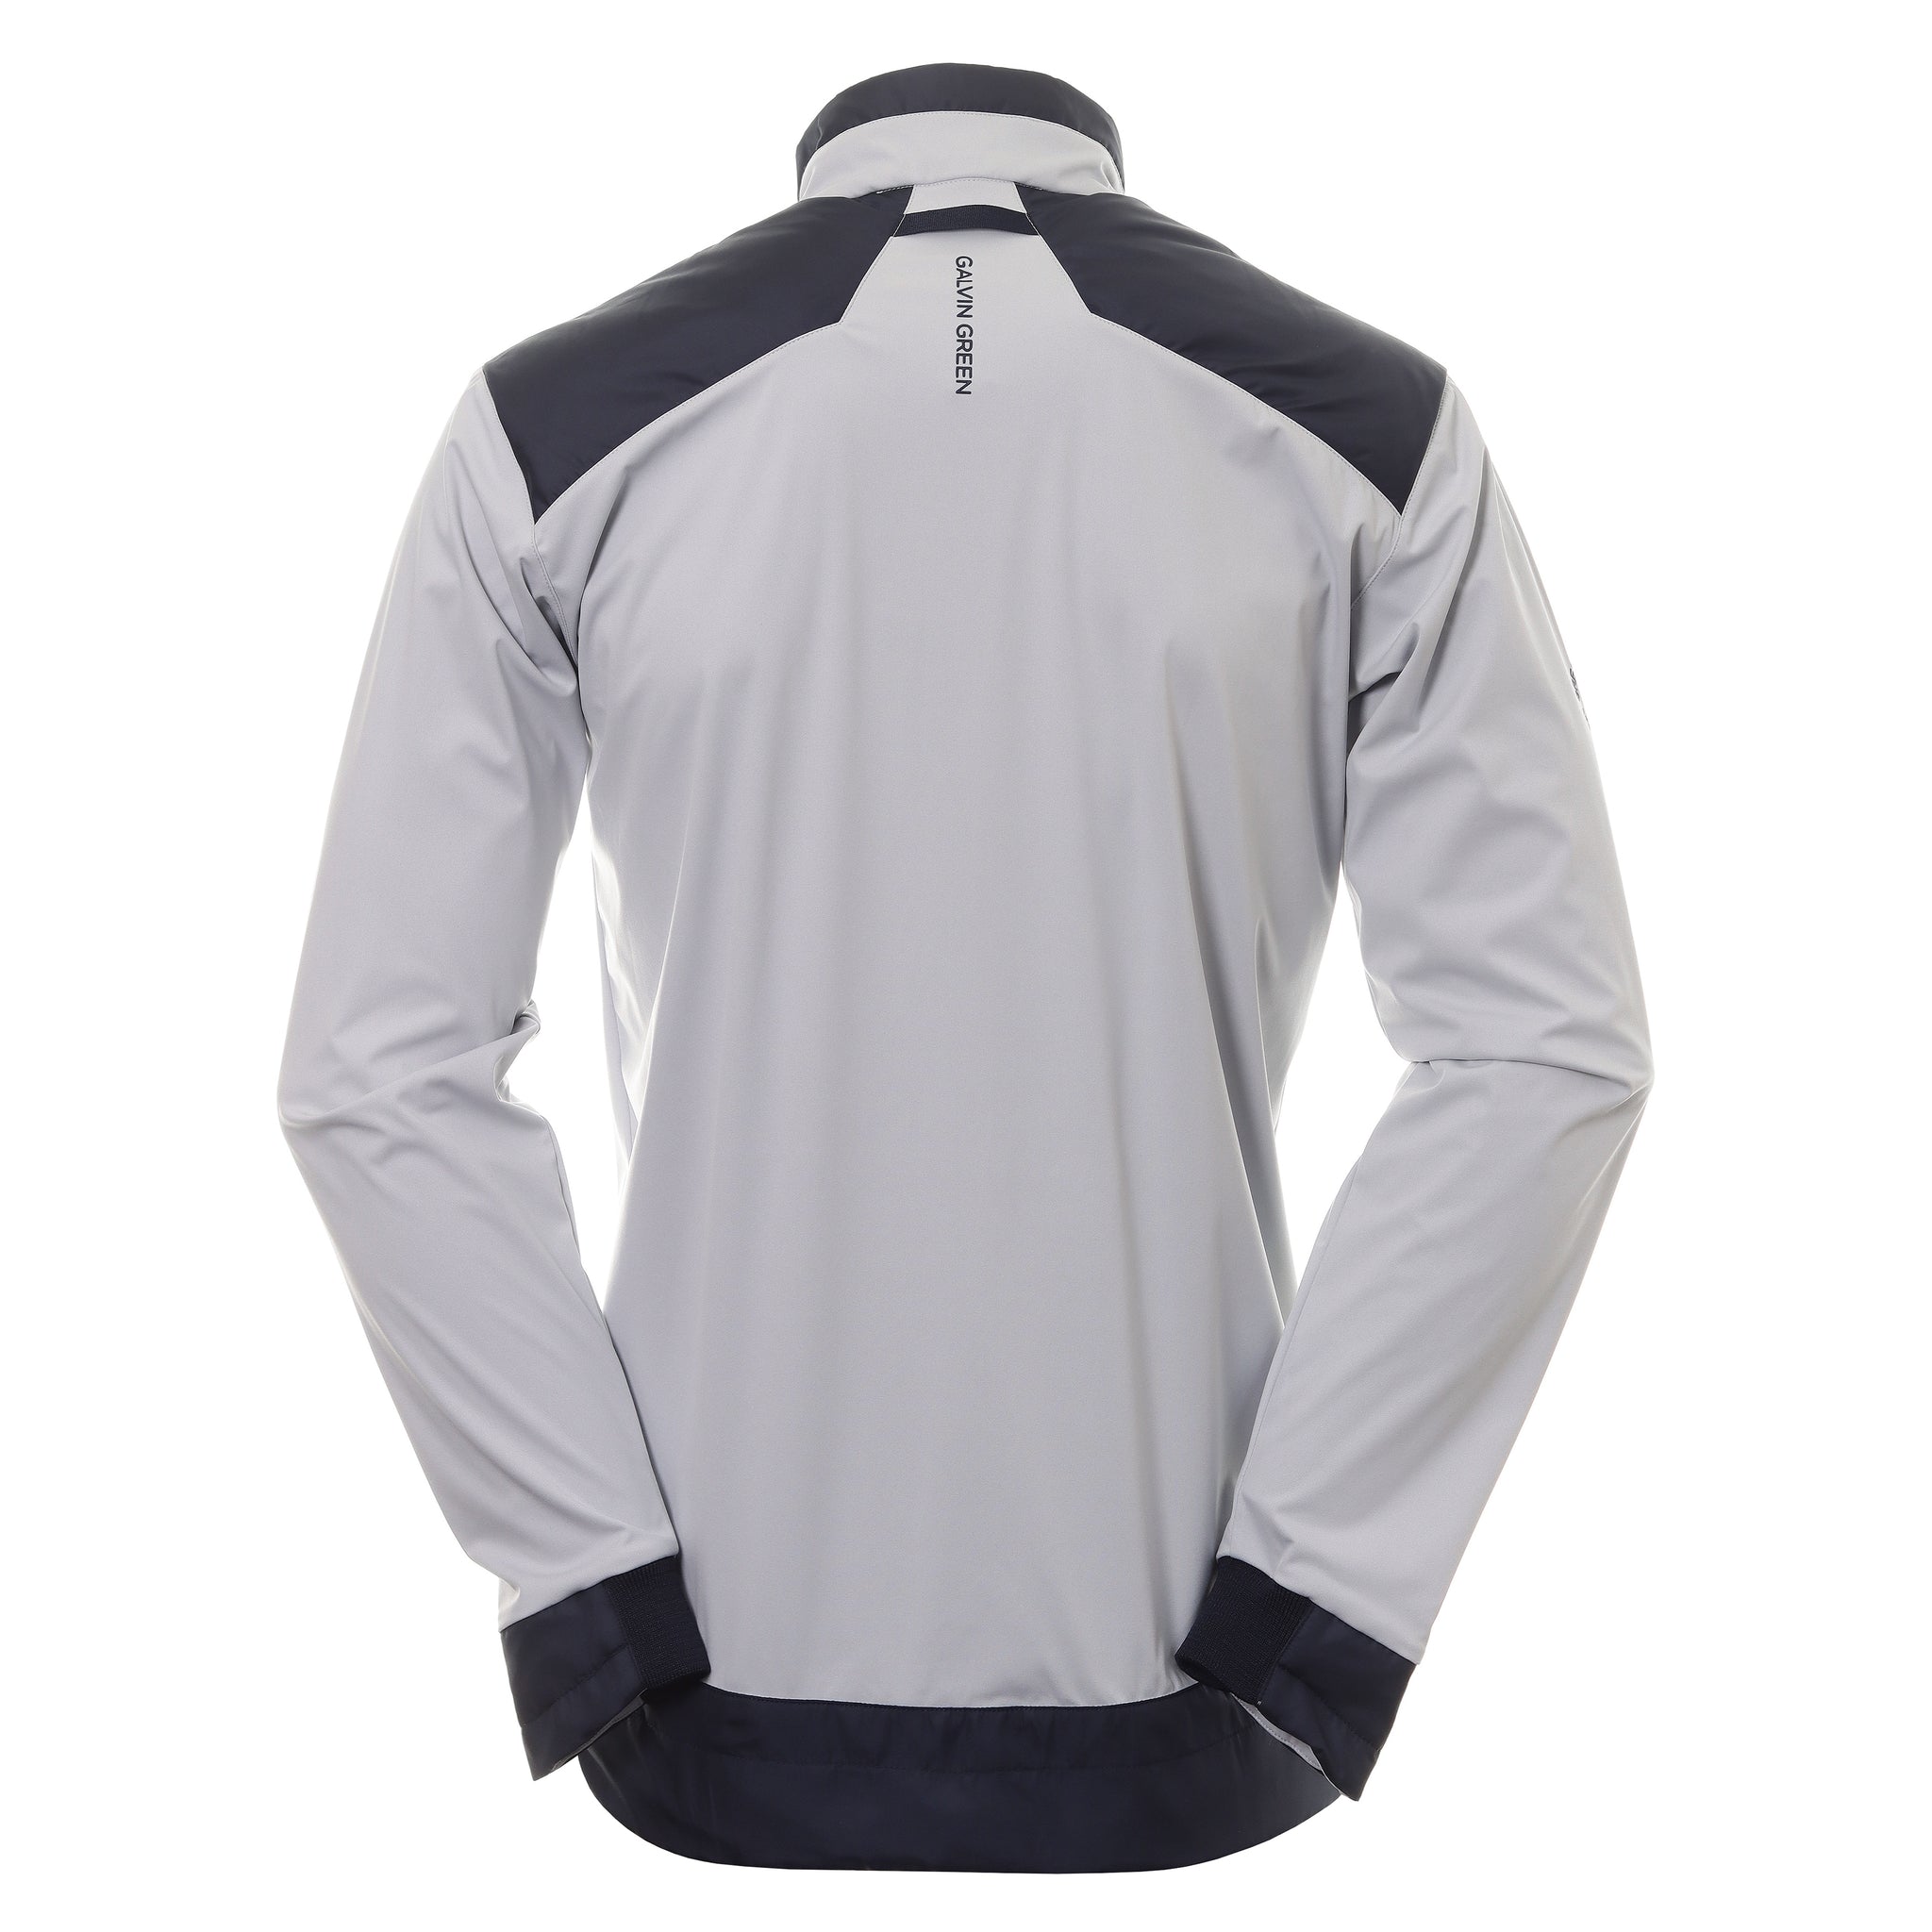 Galvin Green Liam Interface-1 Thermore Jacket